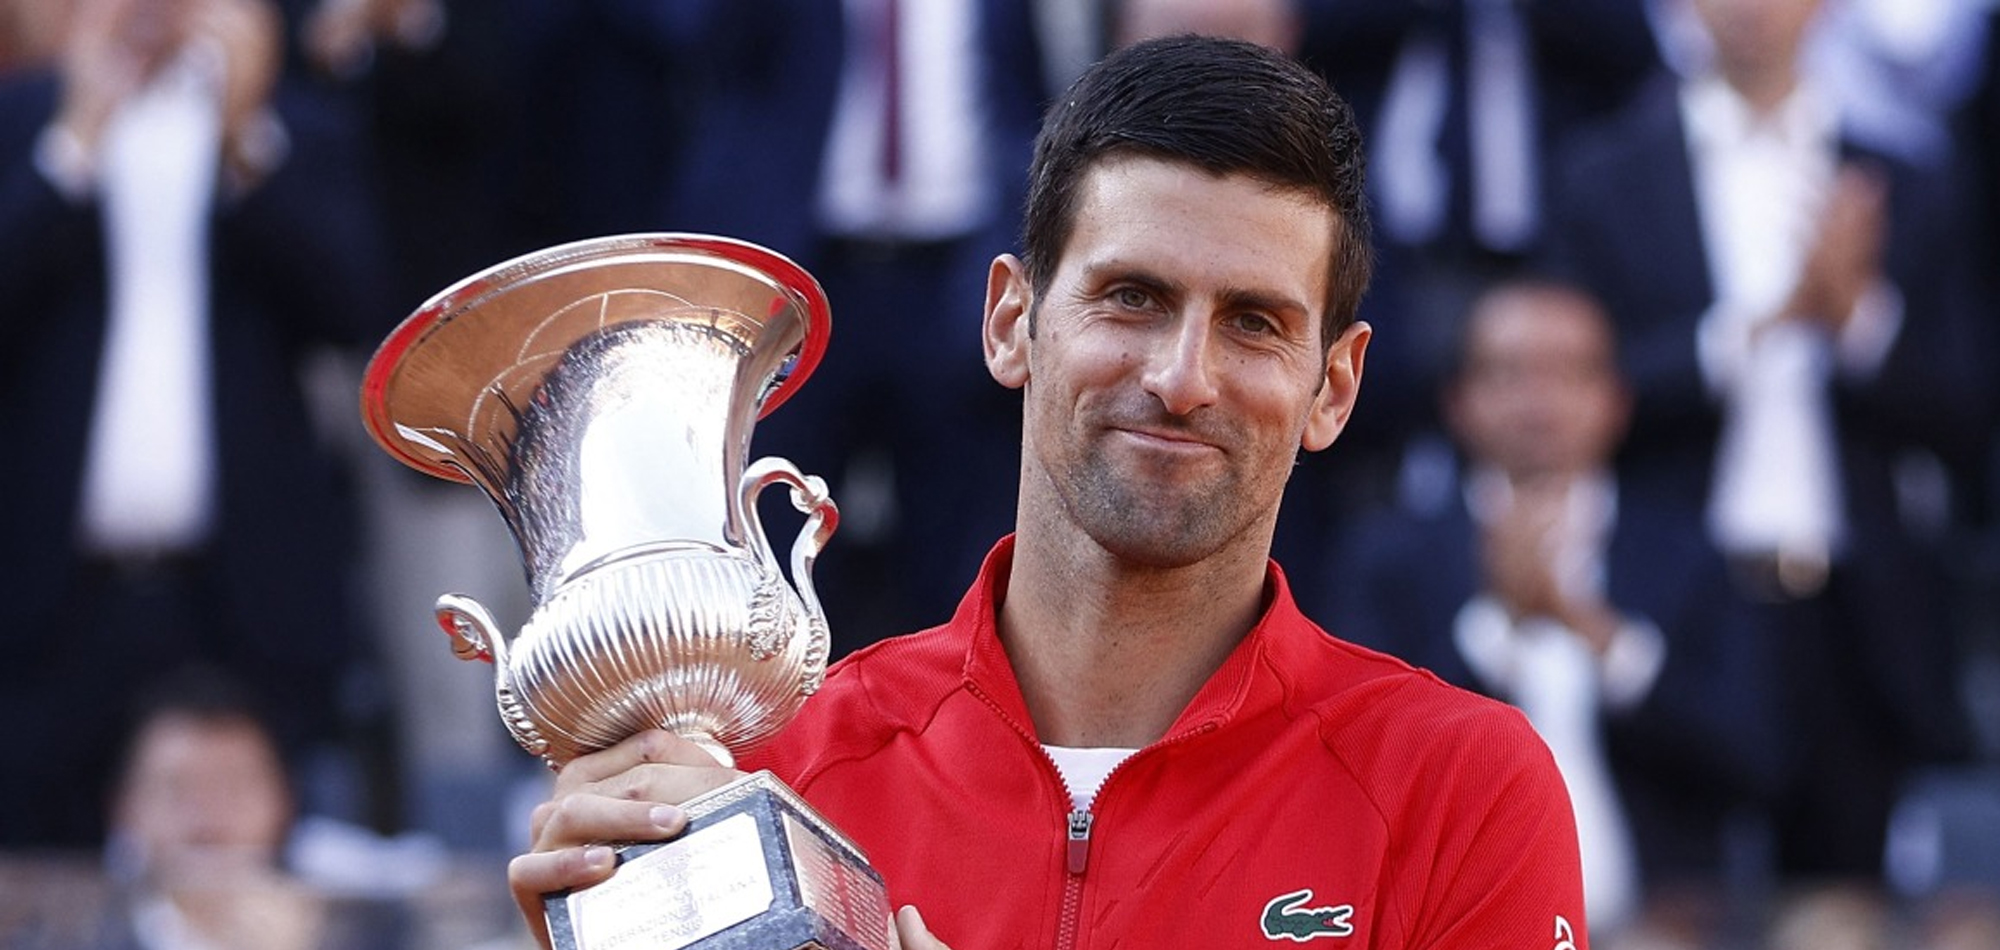 Djokovic wins Italian Open to claim first title in over six months